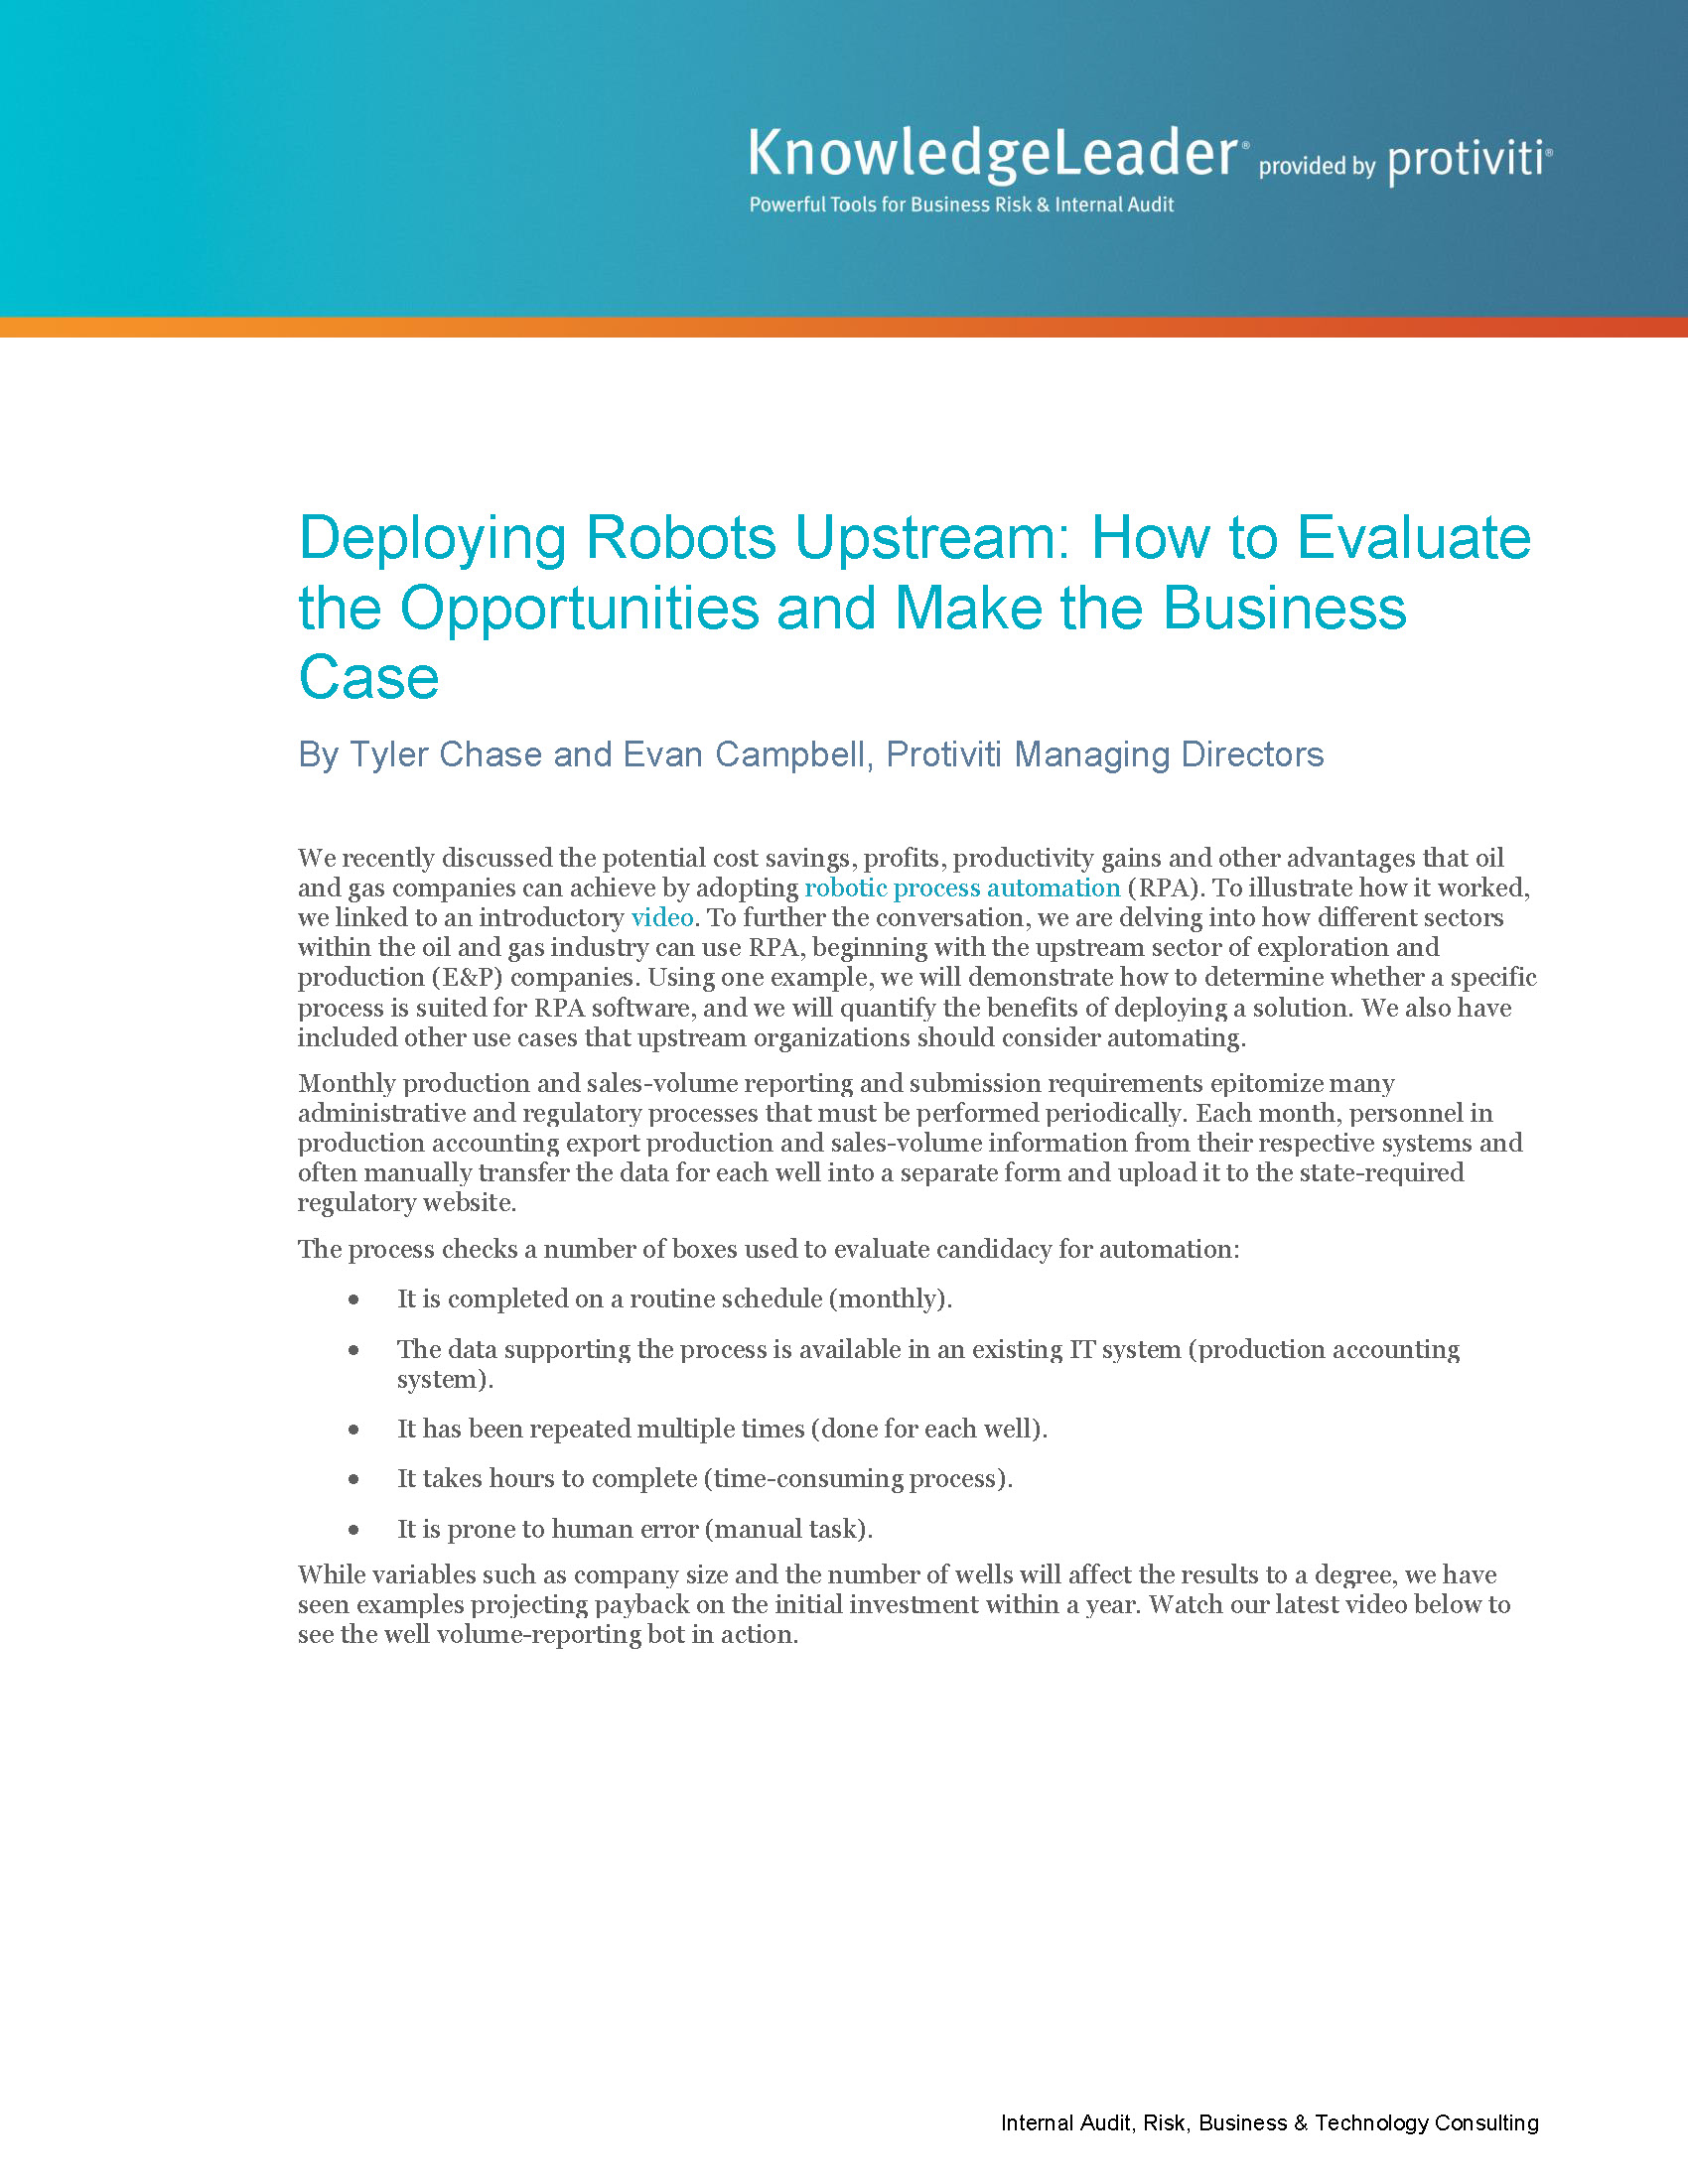 Screenshot of the first page of Deploying Robots Upstream-How to Evaluate the Opportunities and Make the Business Case